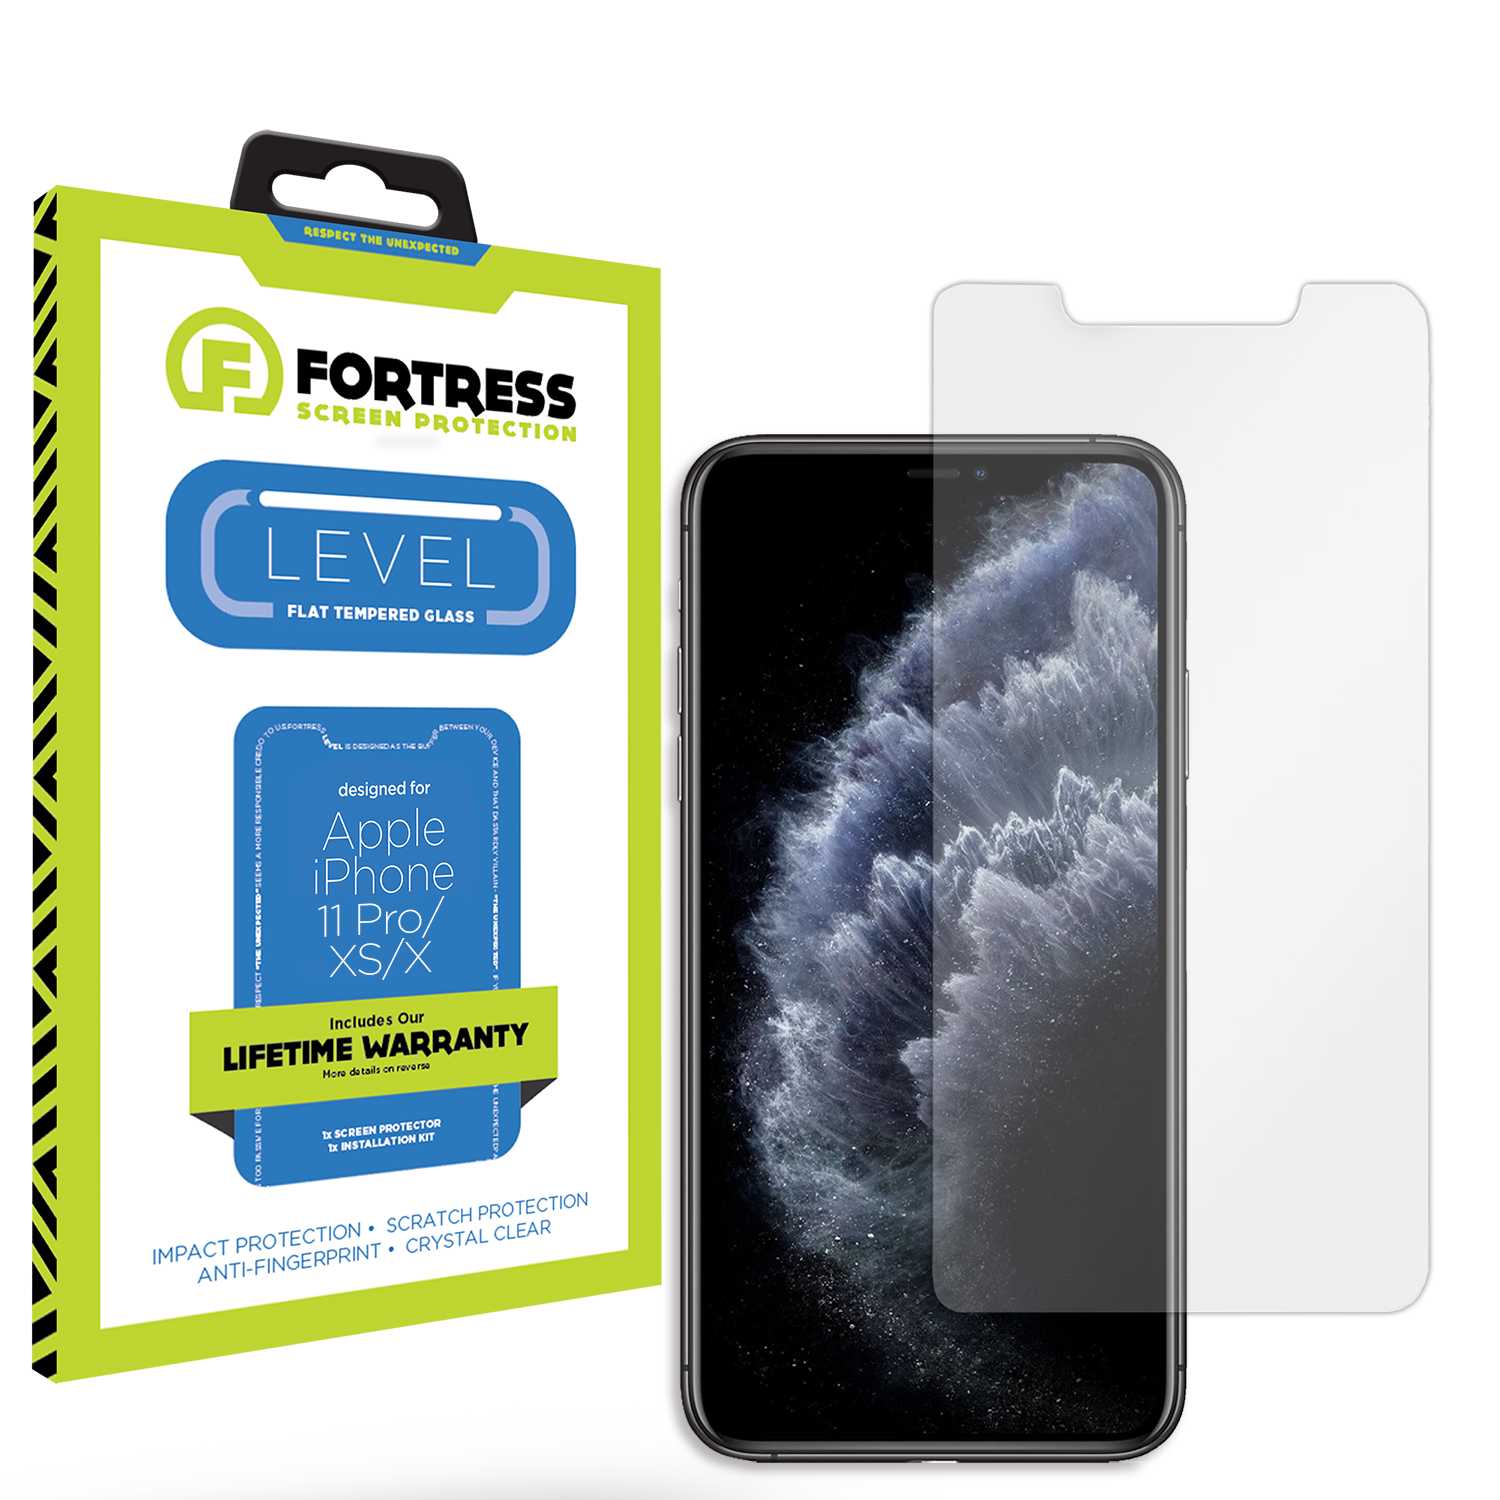 Fortress iPhone X Screen Protector $0Coverage Scooch Screen Protector